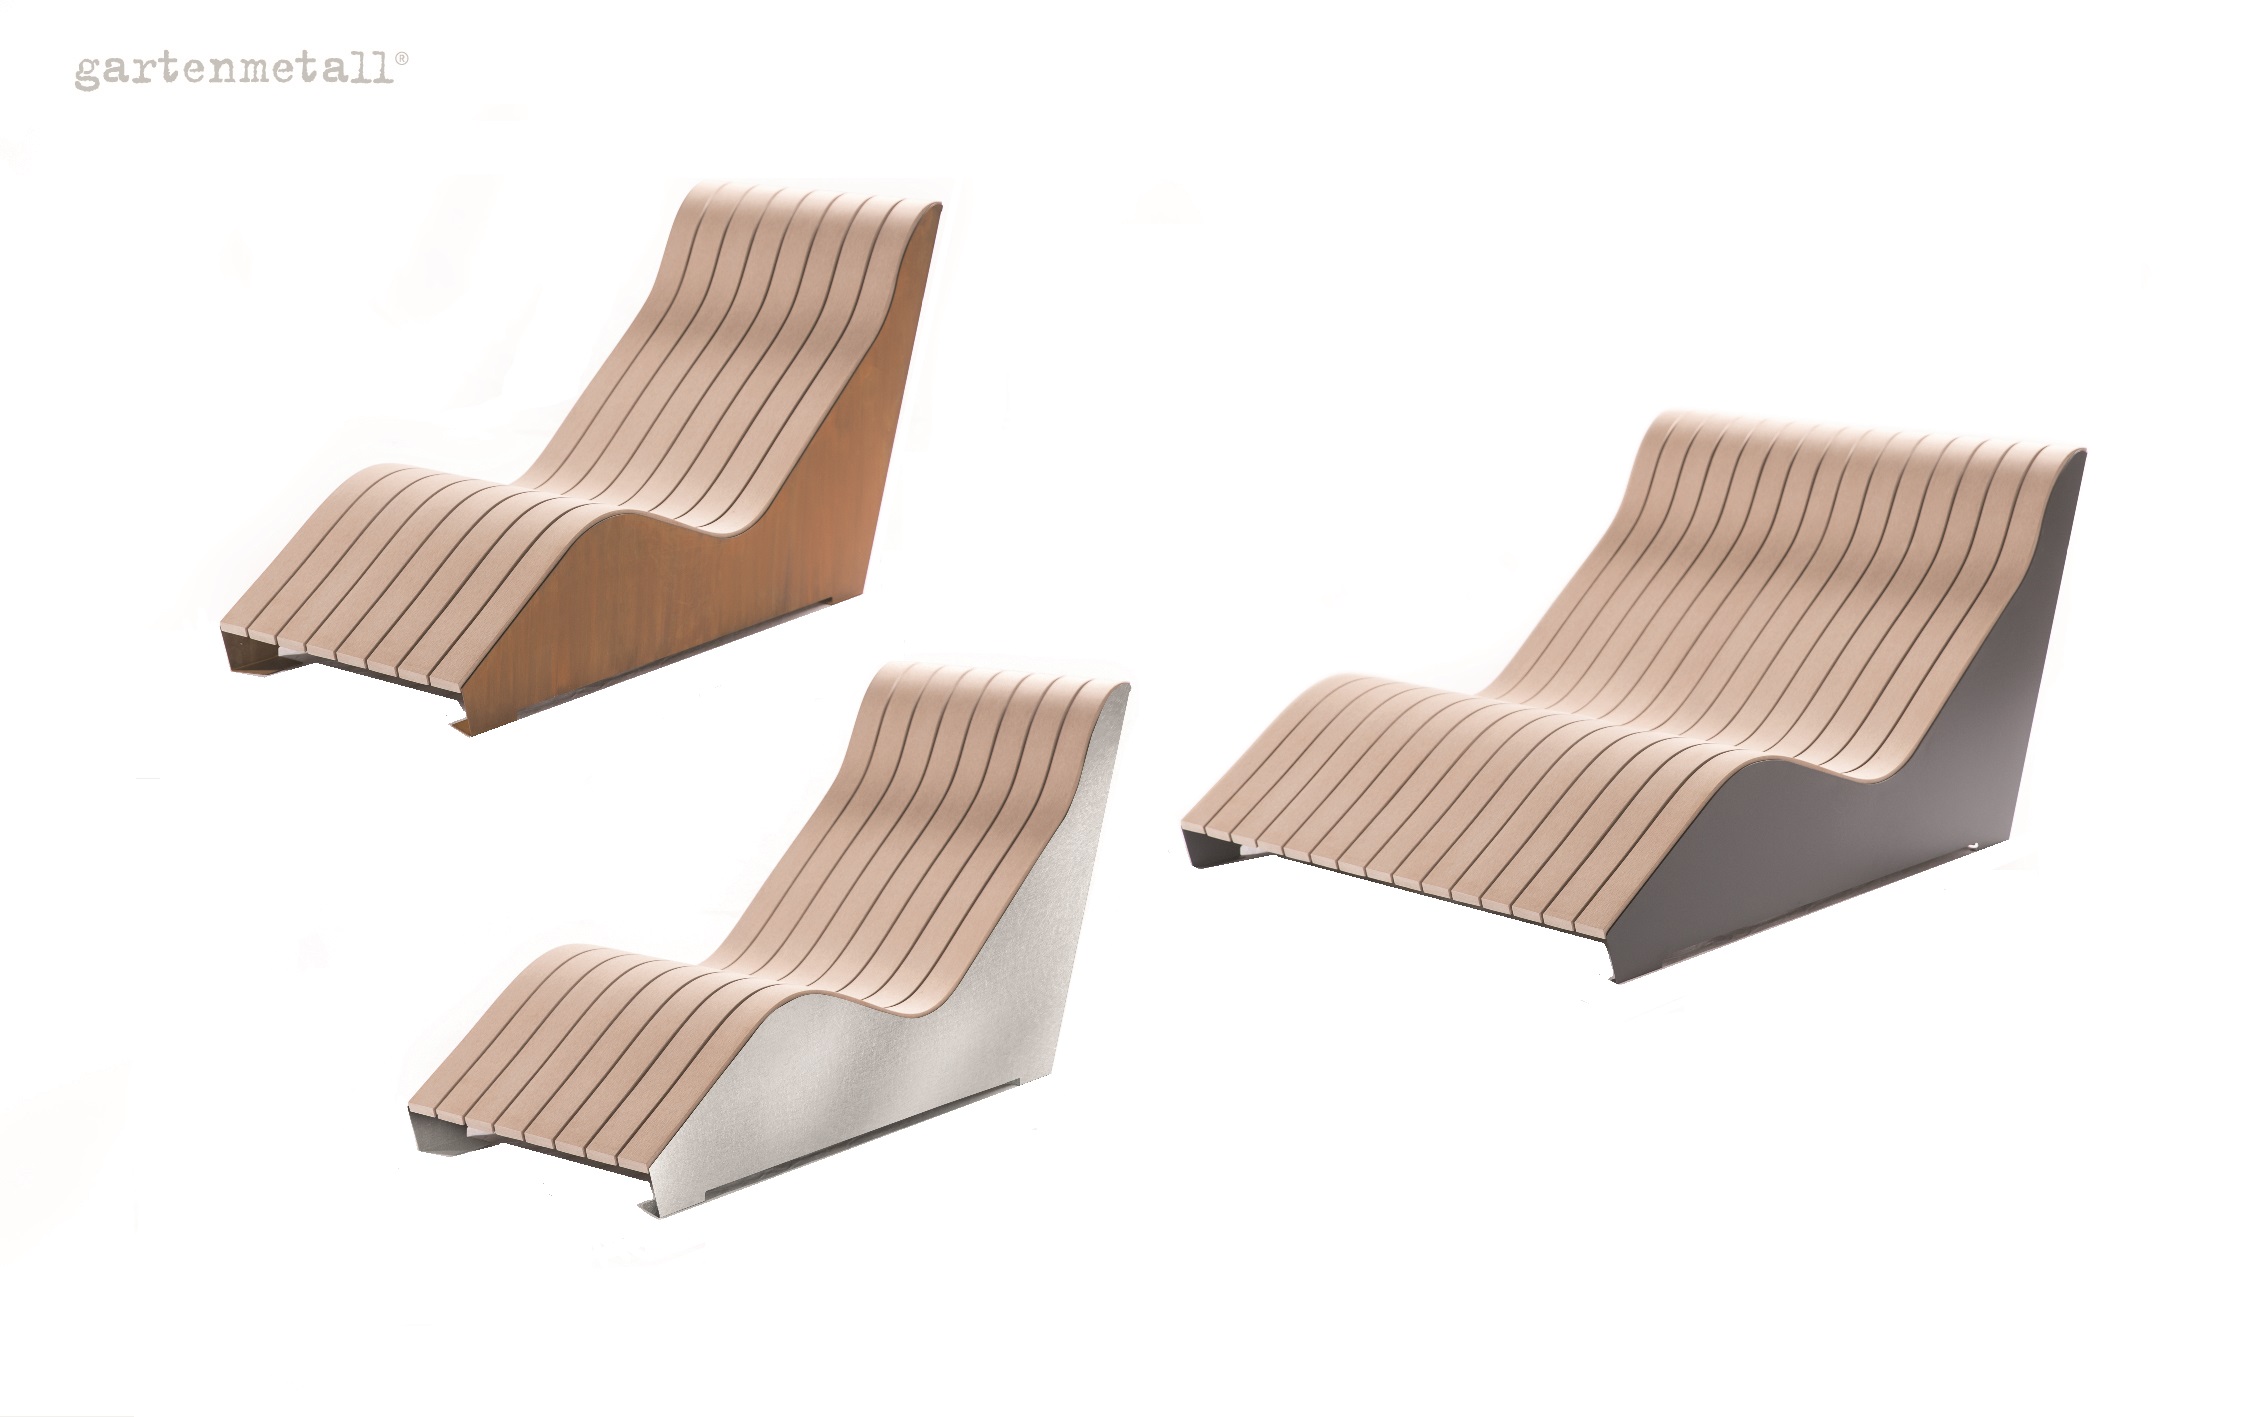 Wave lounger FELICE with RESYSTA support